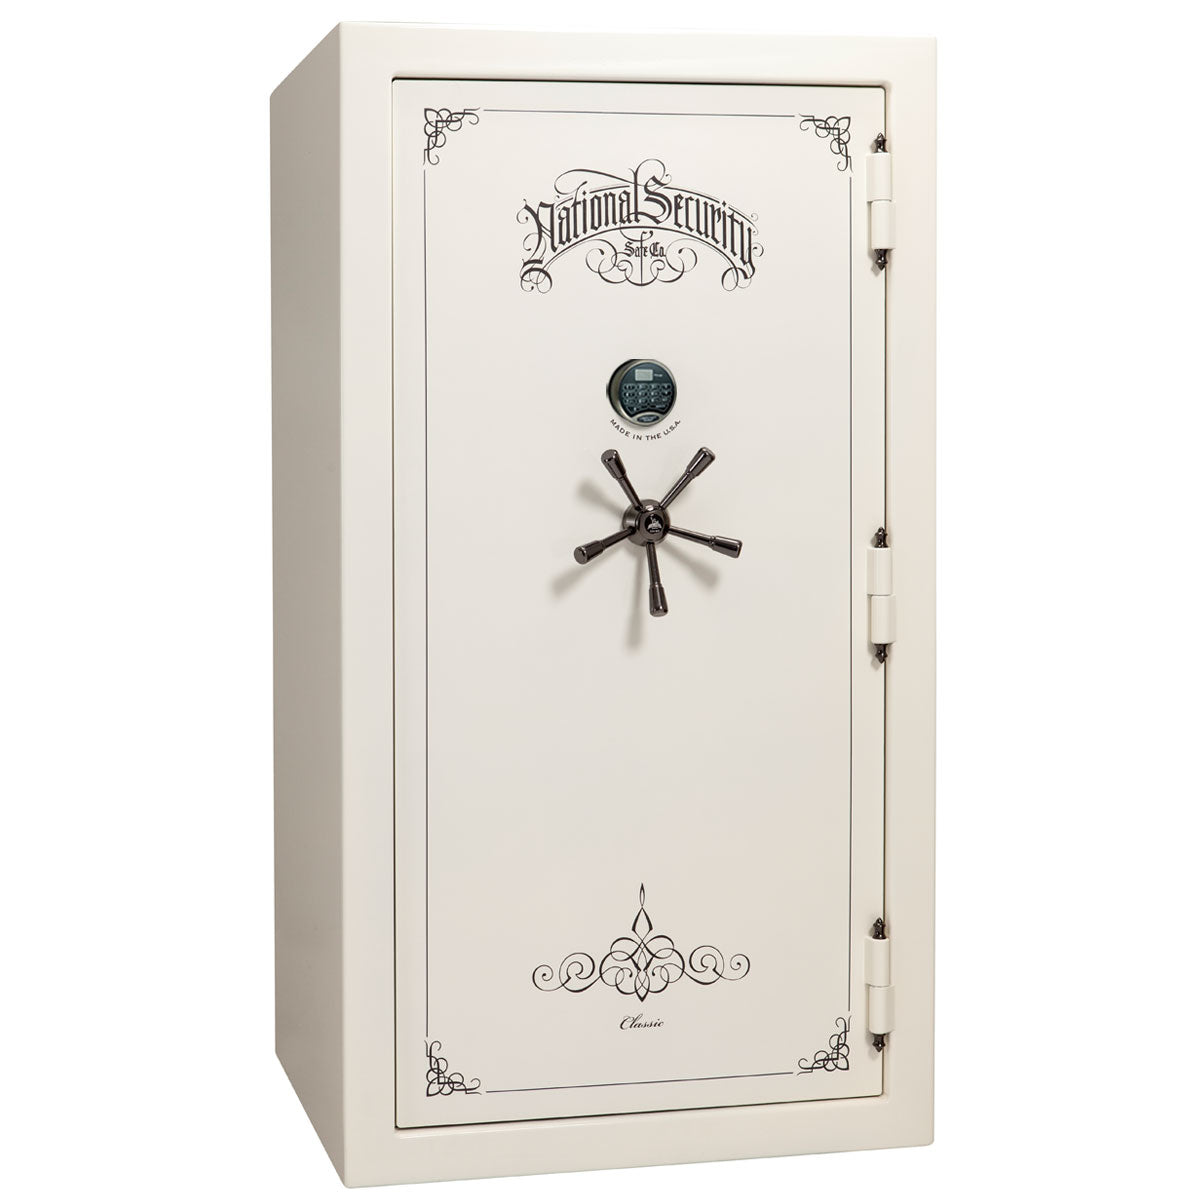 Liberty Safe Classic Plus 40 in White Gloss with Black Chrome Electronic Lock, closed door.